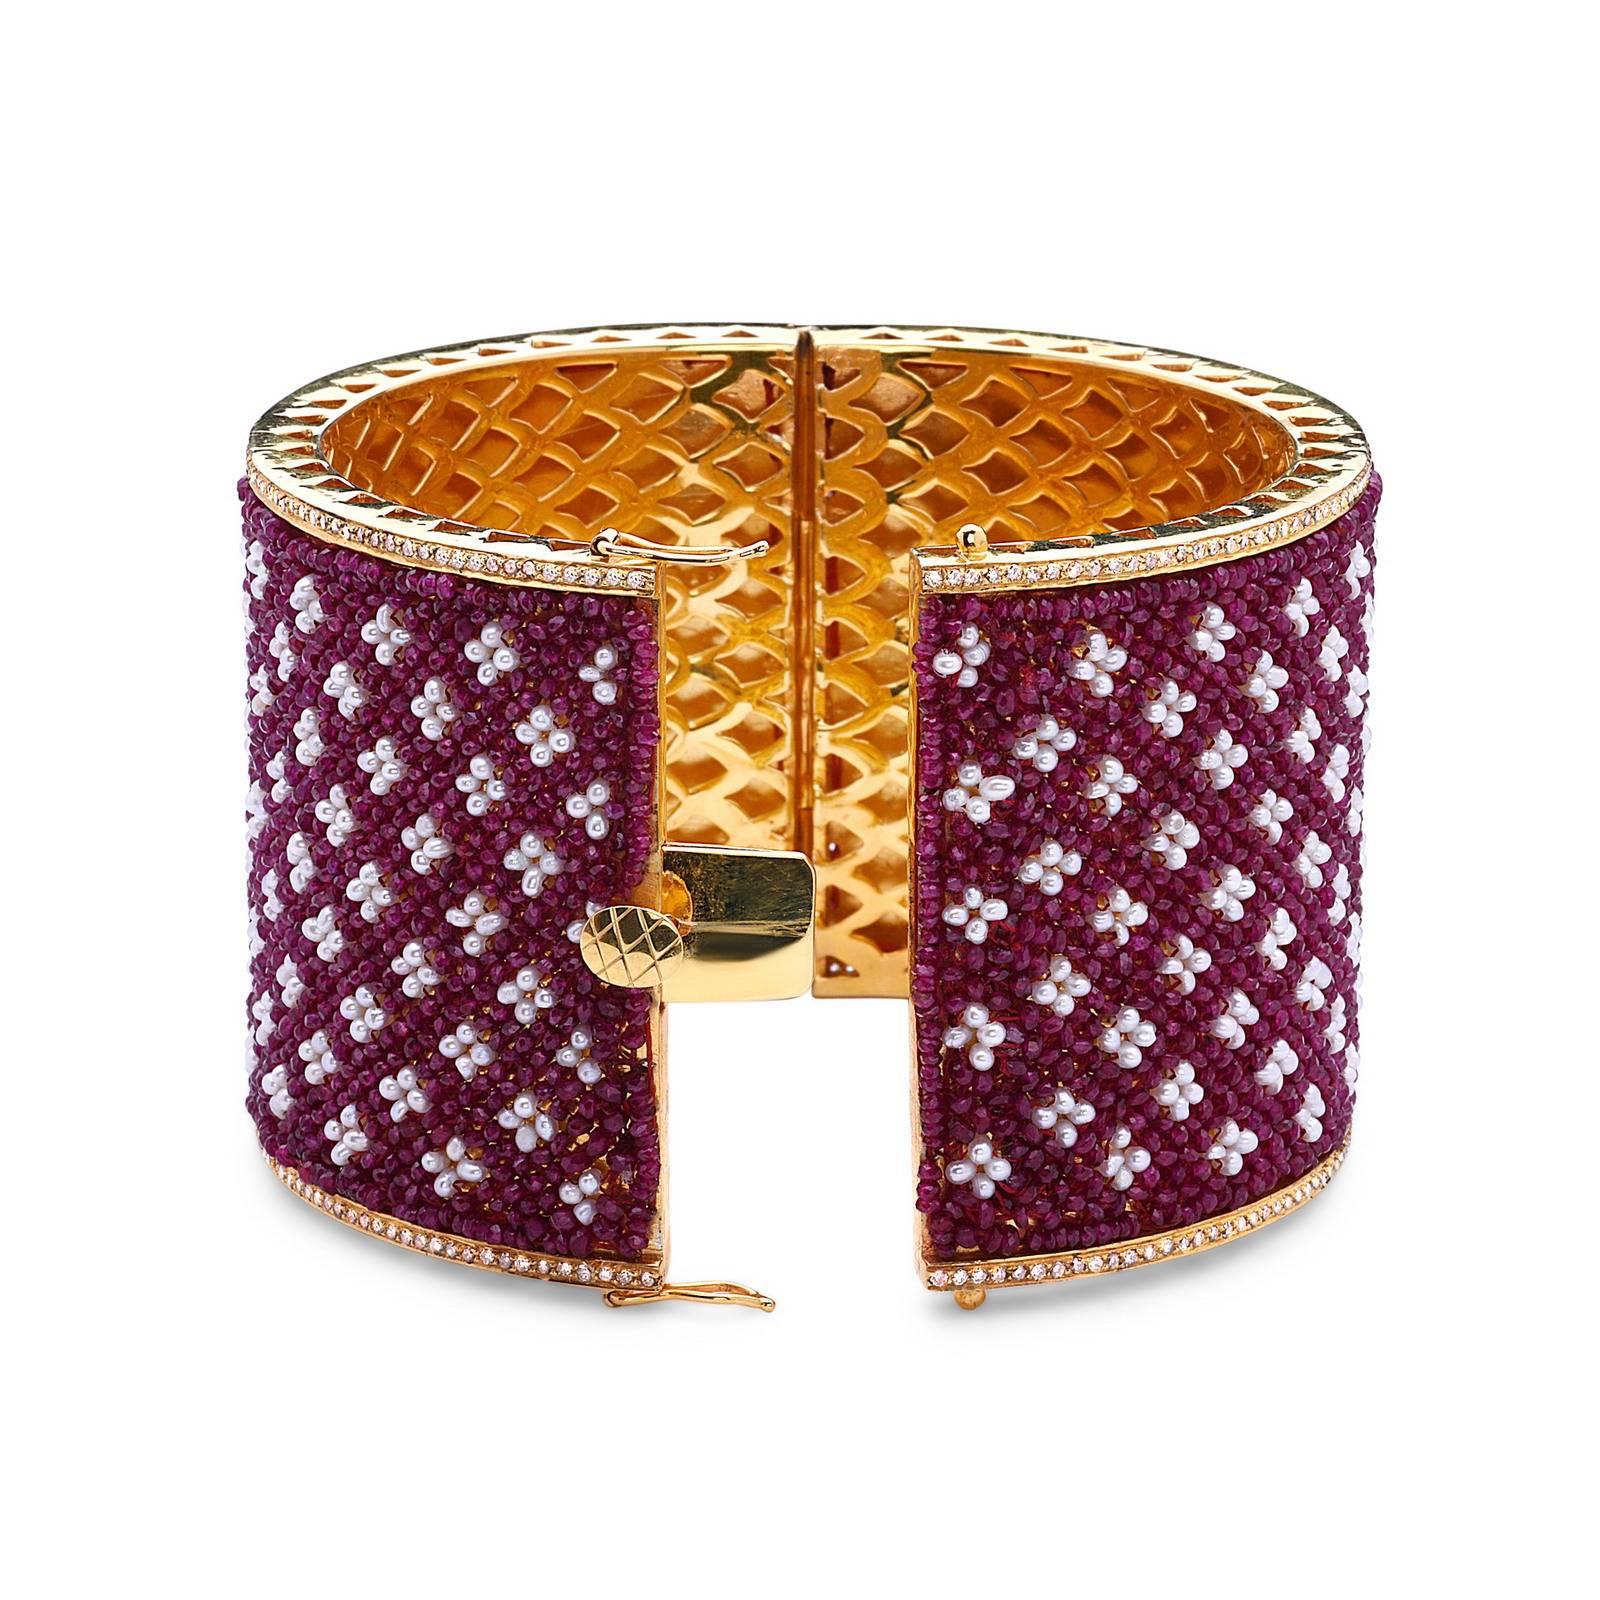 One of It's Kind 14K Yellow Gold & Silver Ruby & Pearl hand sewn 2 inch broad bangle with beautiful hand carved gold design inside the bangle. Total of 115.47cts of Ruby, 2.50cts of Diamonds and 70.45cts of Fresh Water Pearls. A truly owners